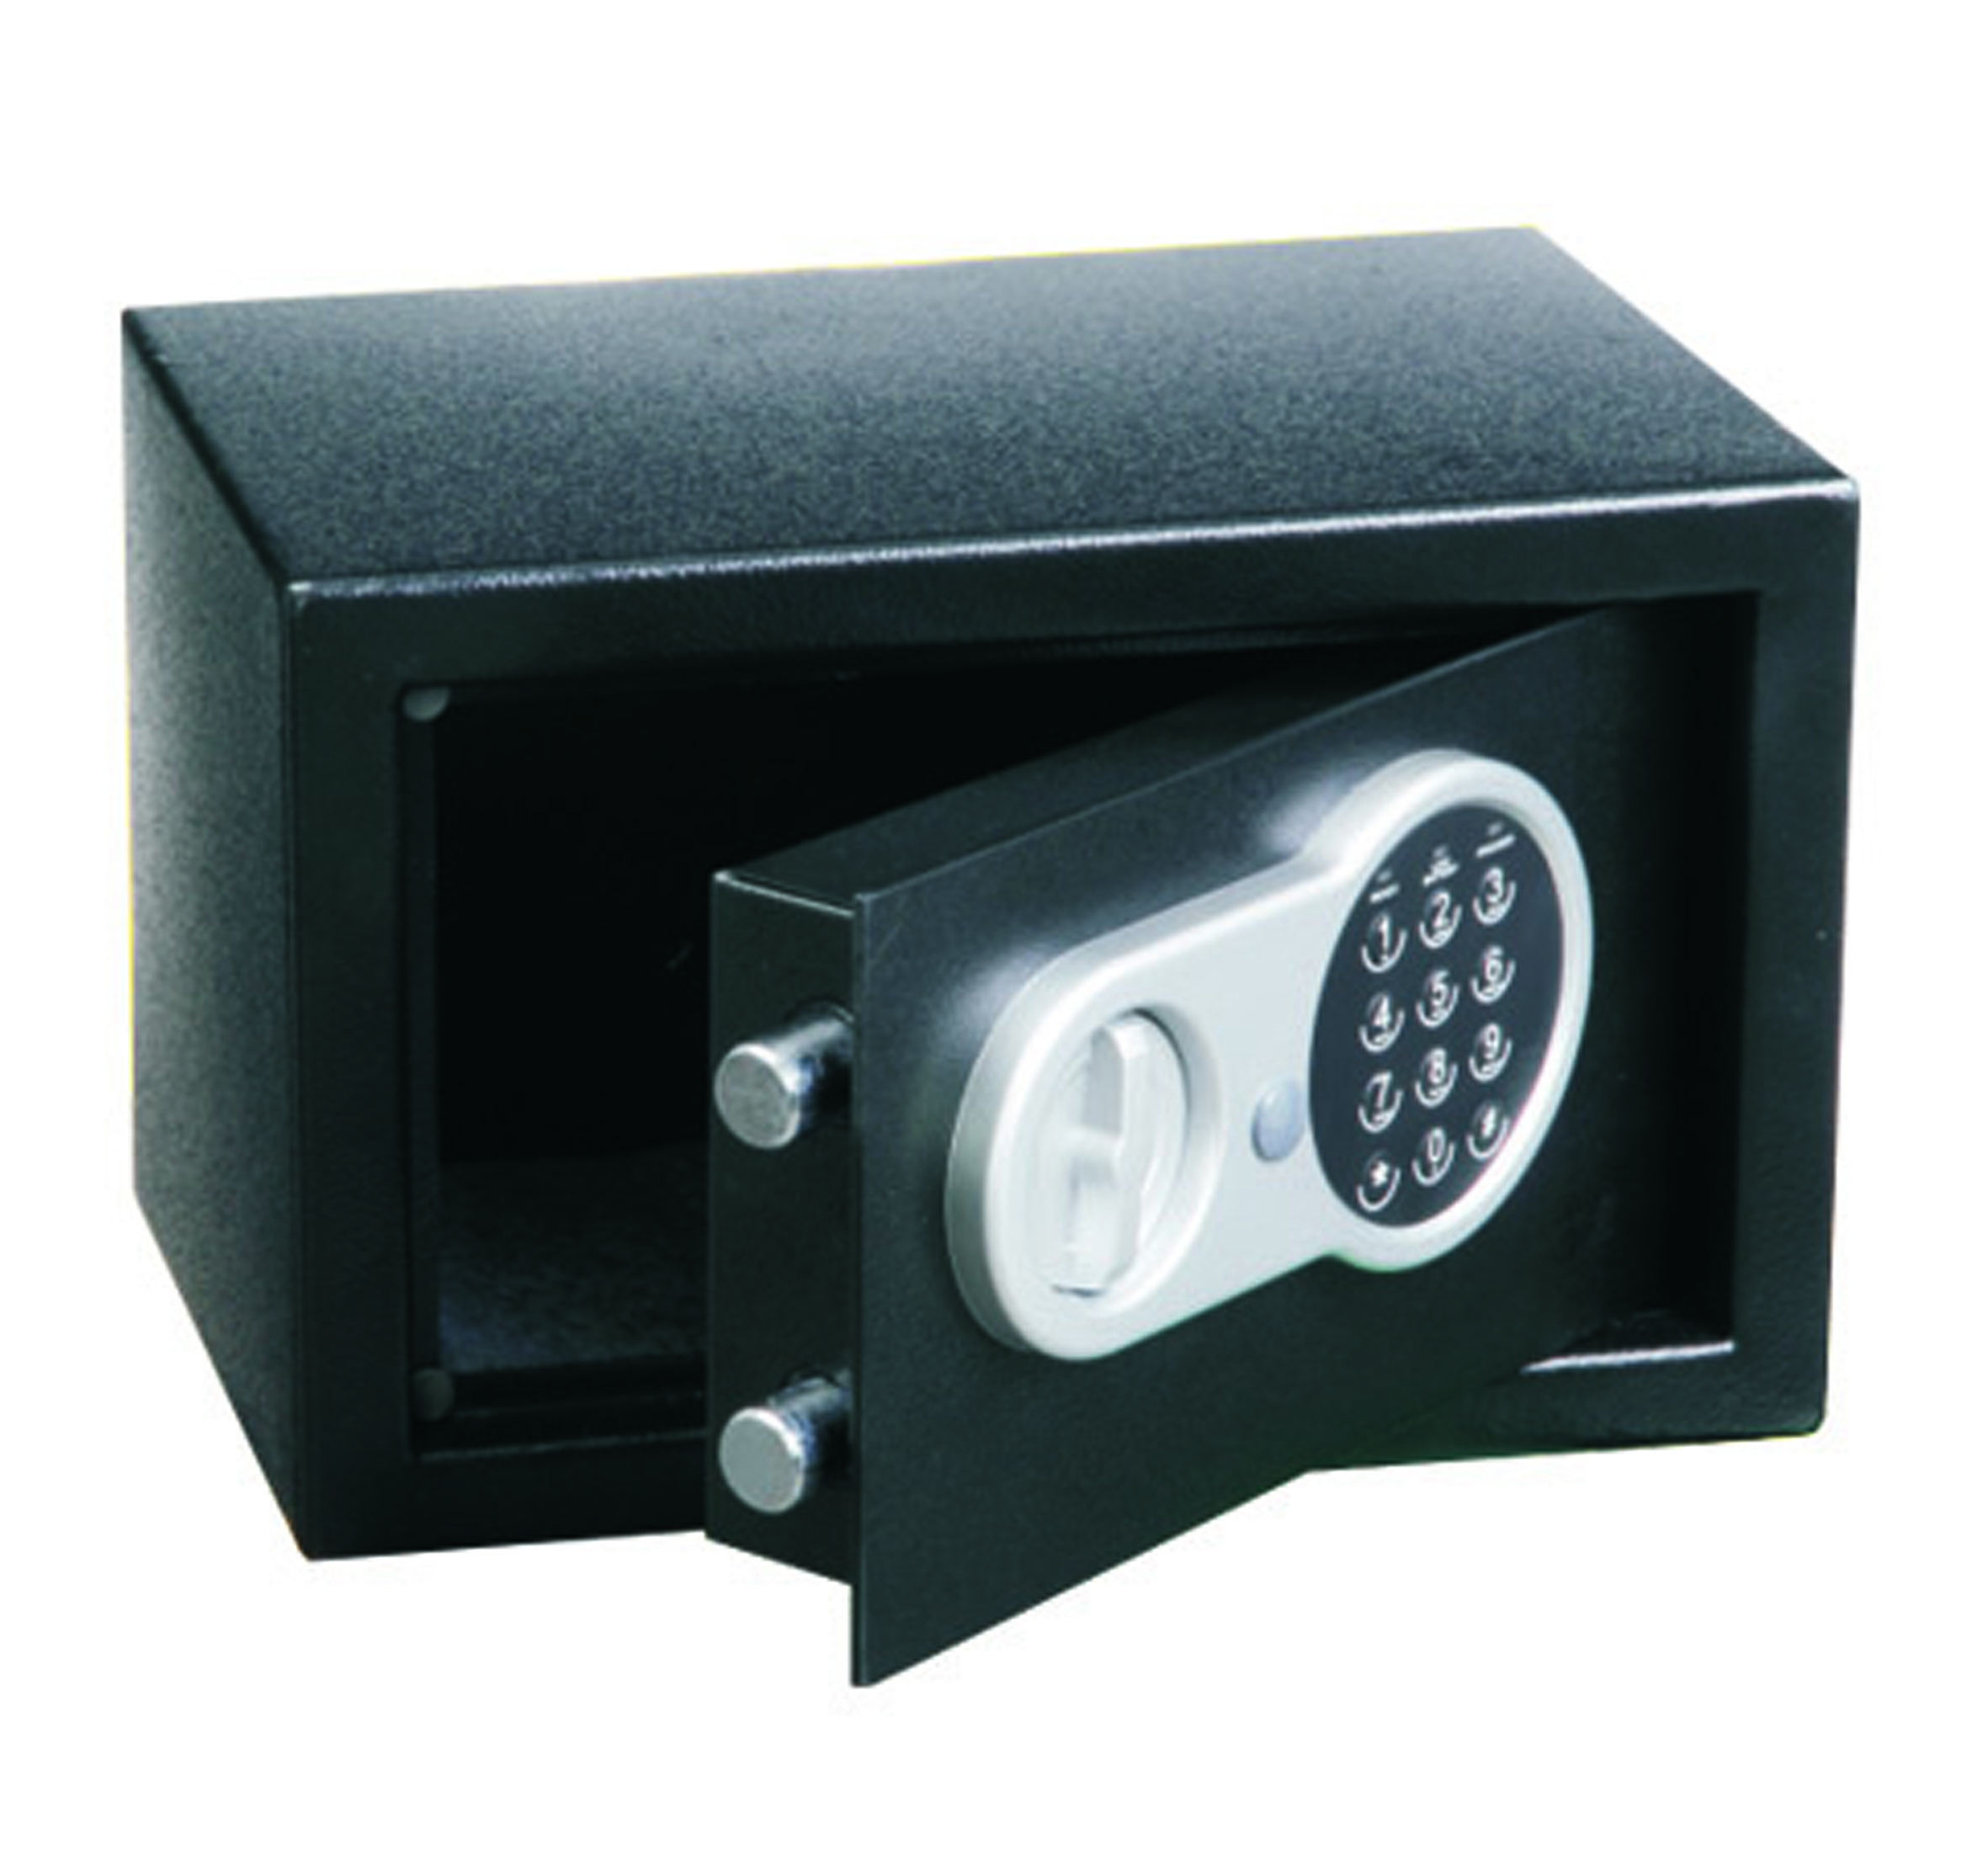 Mingyou 20SEF Factory Outlet High Quality Office Safe Money Box Gun Safe Coffre Fort for Home Office